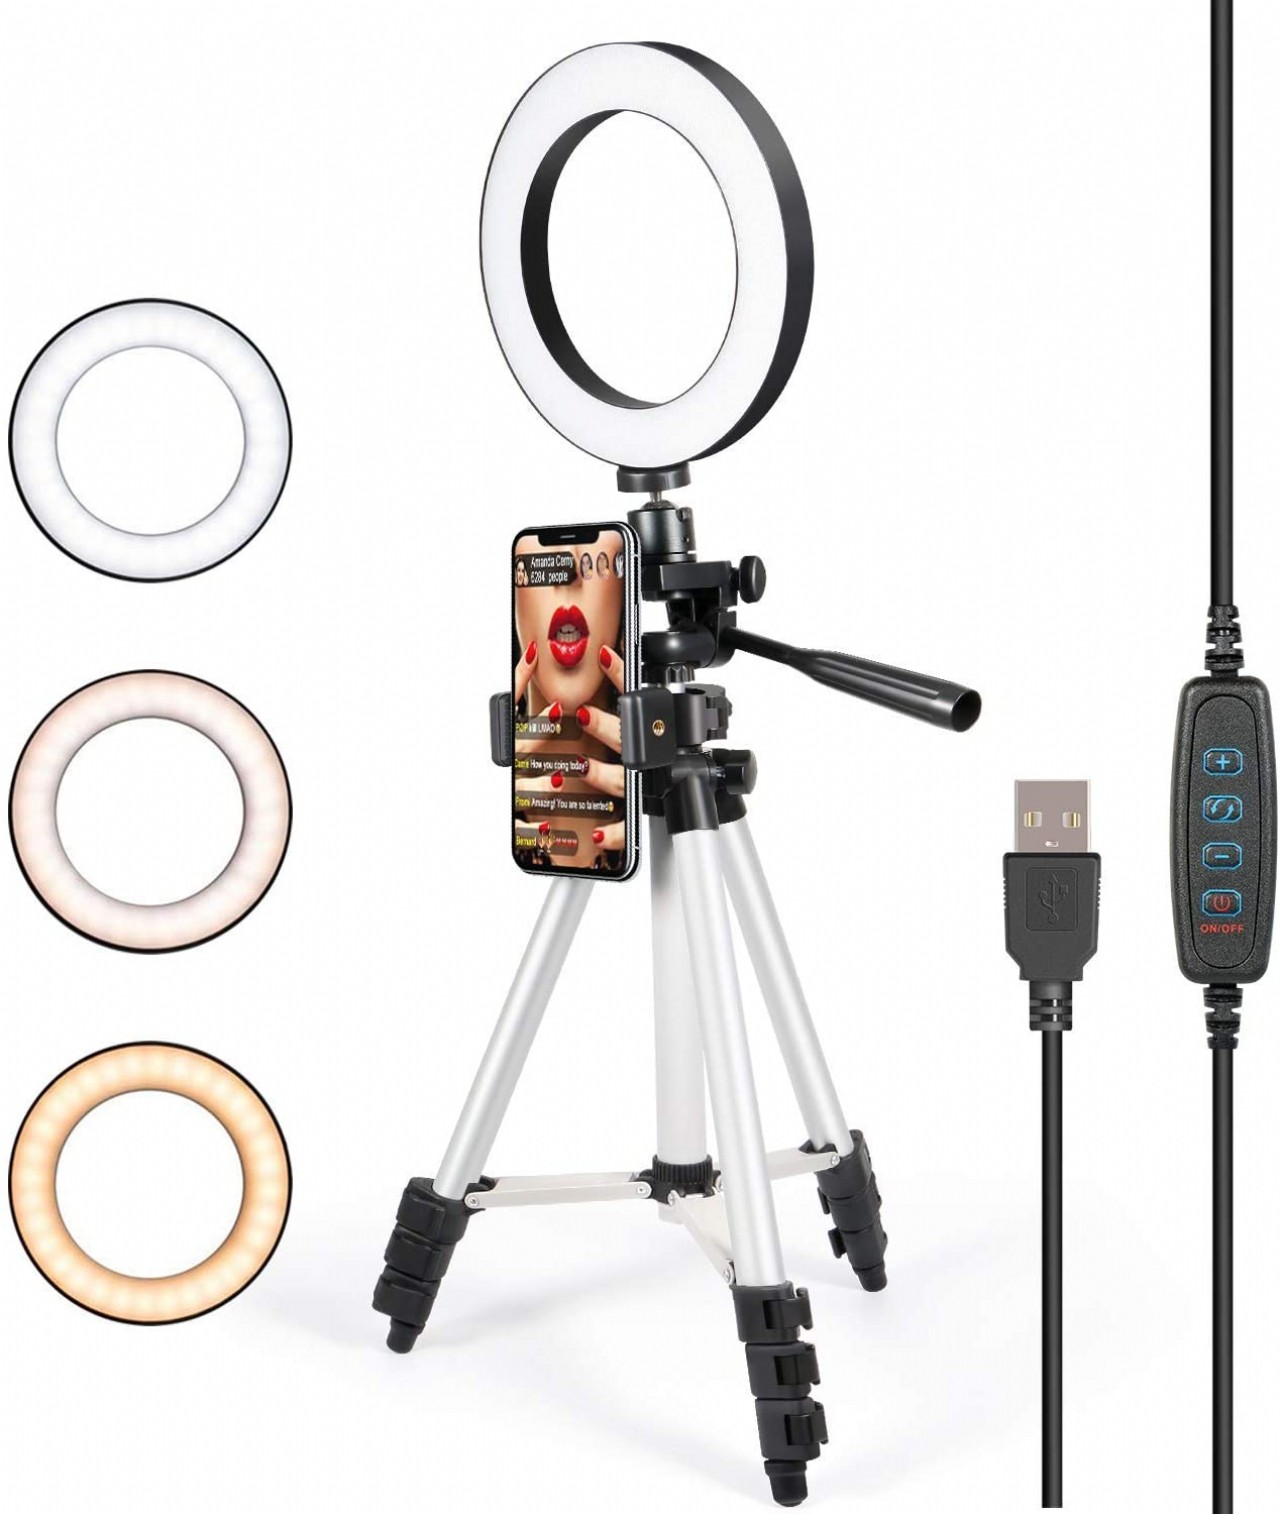 Selfie Ring Light with Tripod Stand for Live Stream - LED Ring Light with Cell Phone Holder